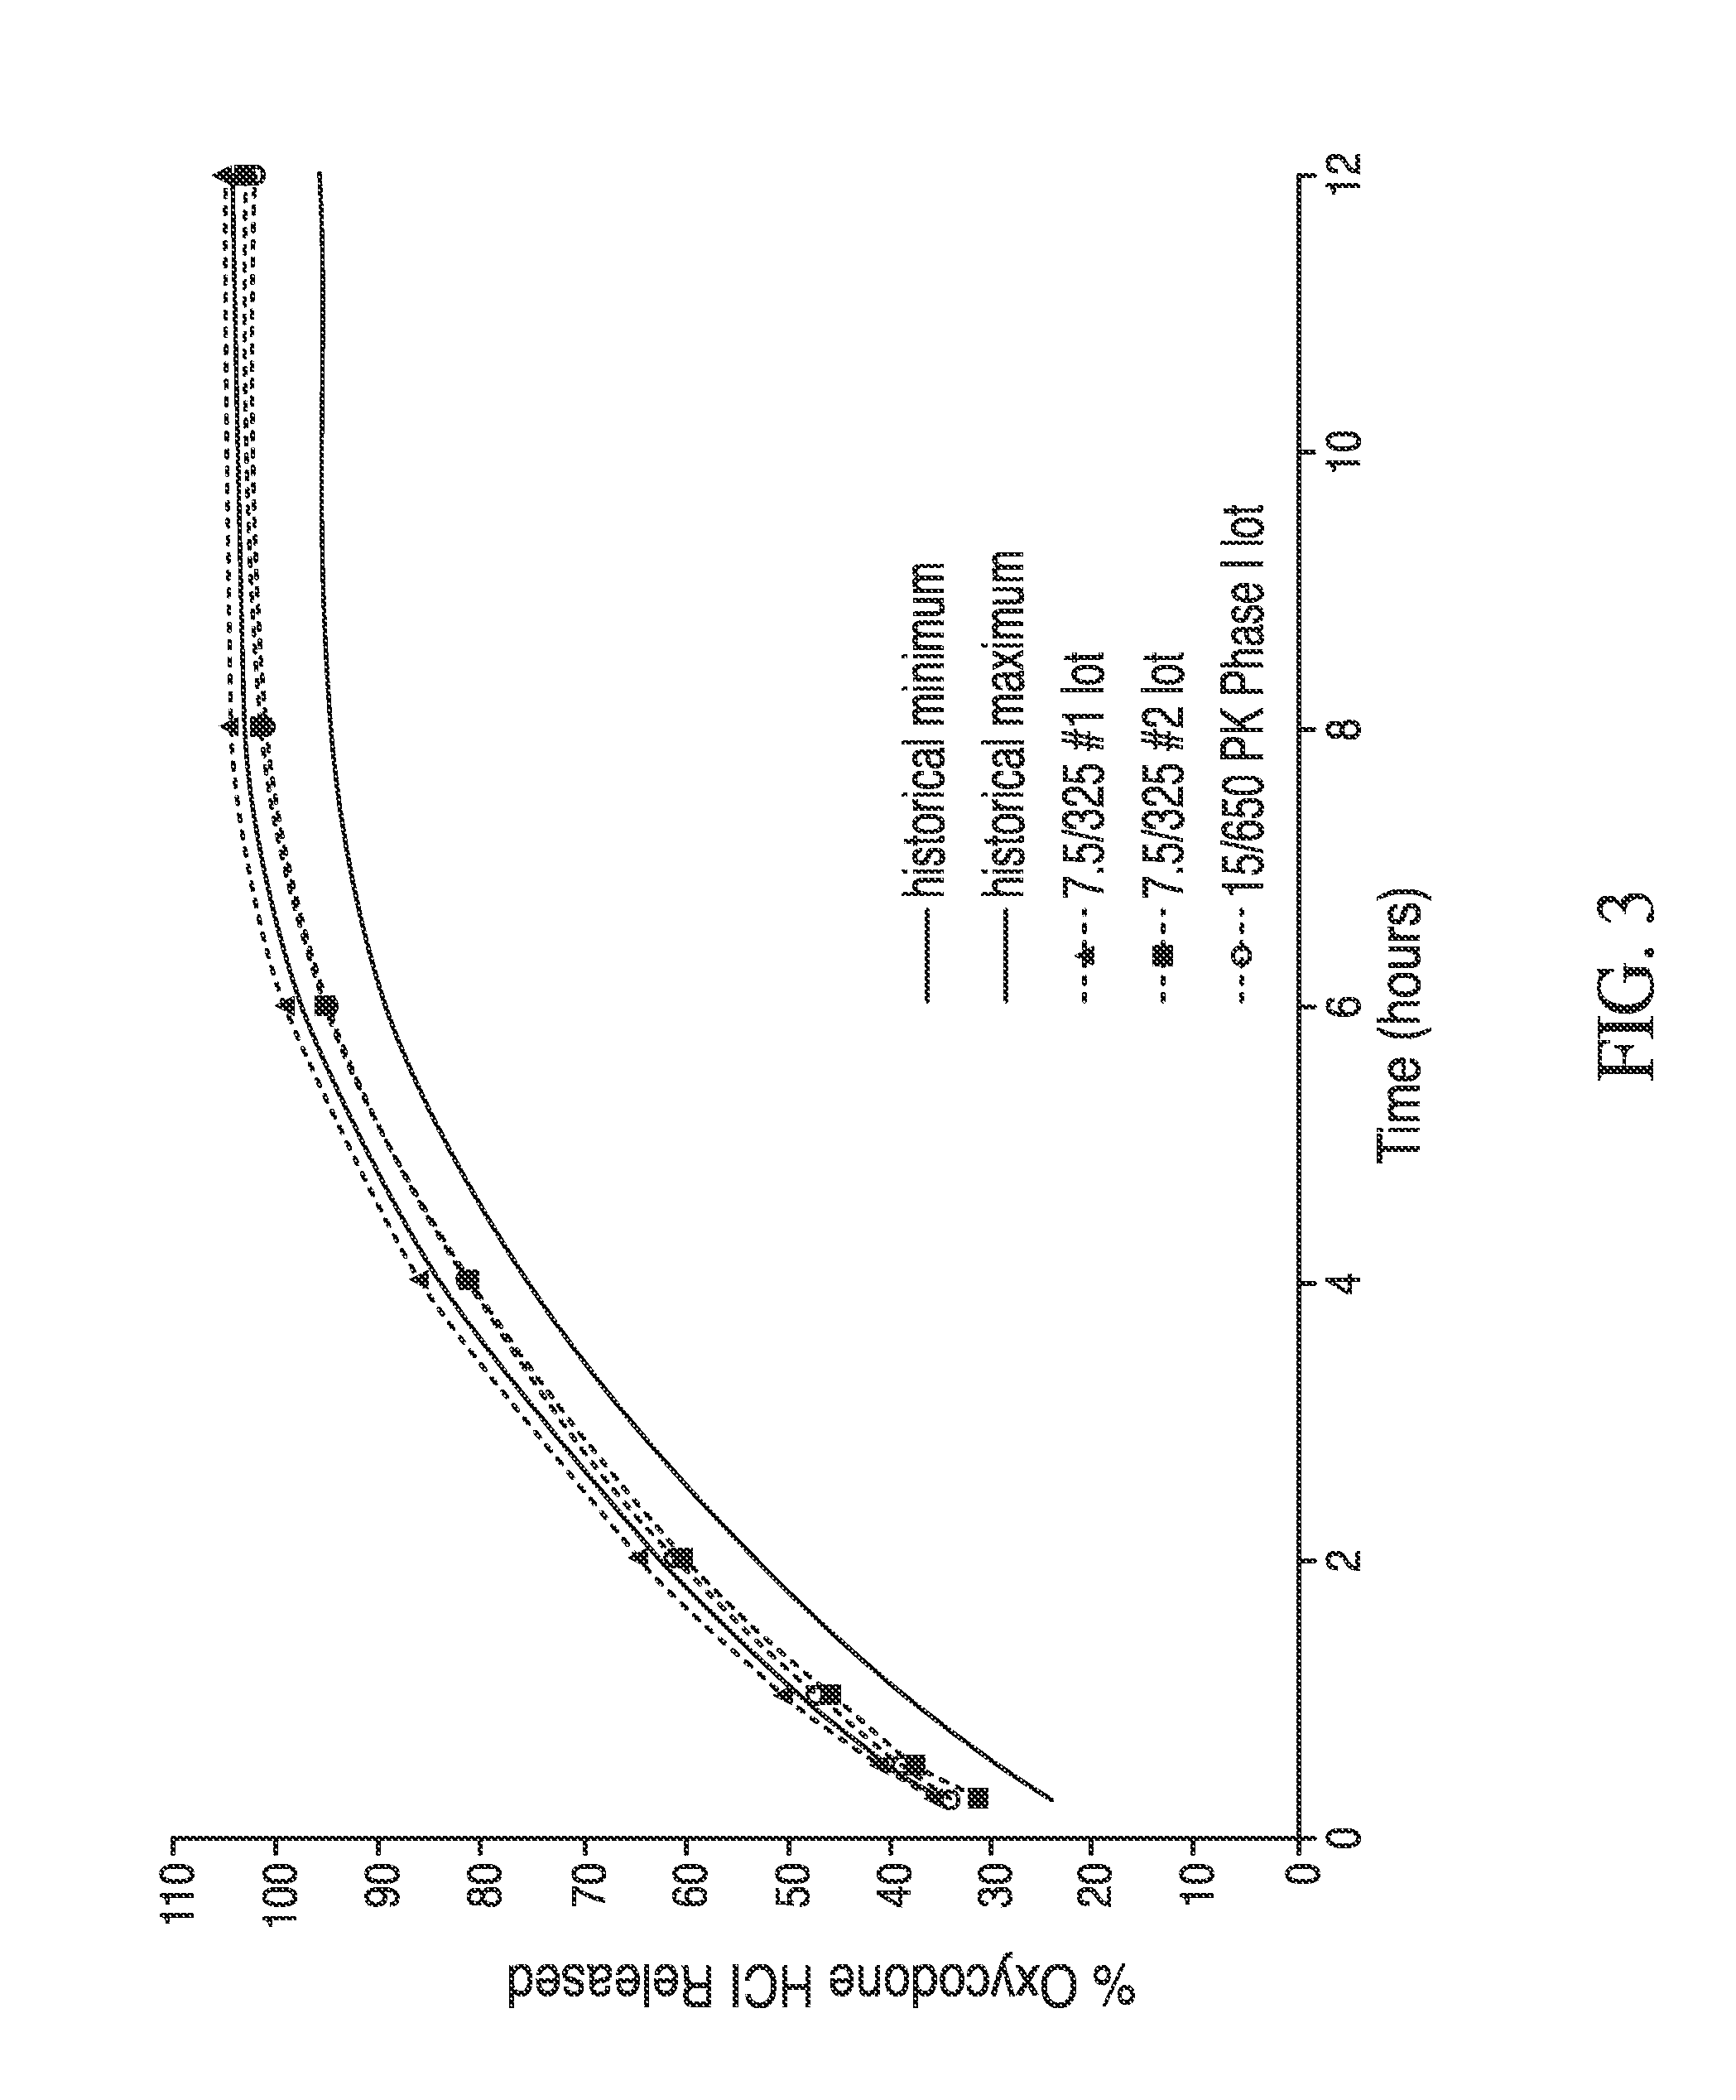 Compositions Comprising An Opioid And An Additional Active Pharmaceutical Ingredient For Rapid Onset And Extended Duration Of Analgesia That May Be Administered Without Regard To Food